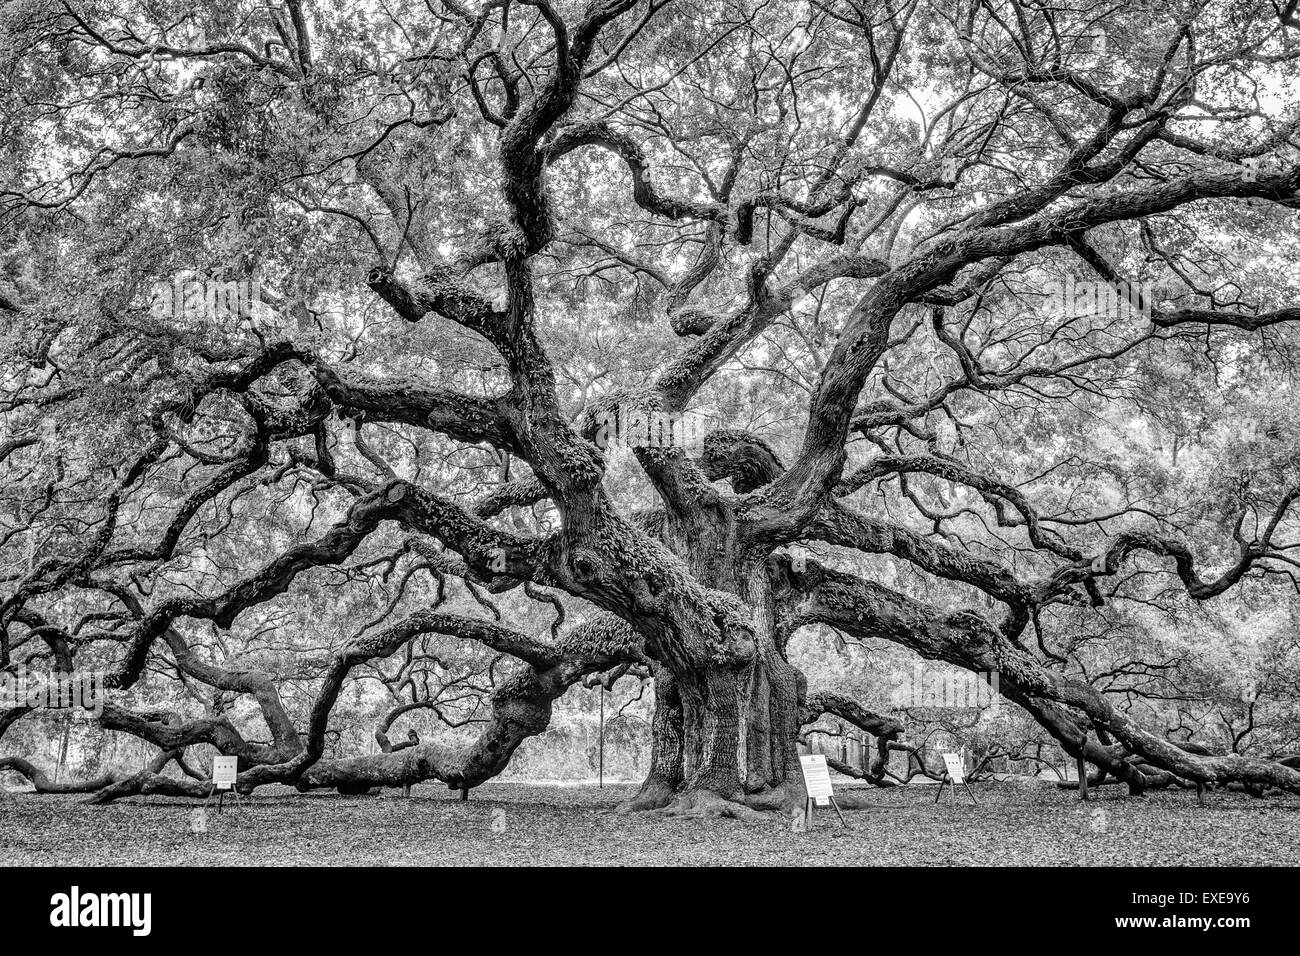 Angel Oak Tree in black and white, located on Johns Island in South Carolina. Stock Photo